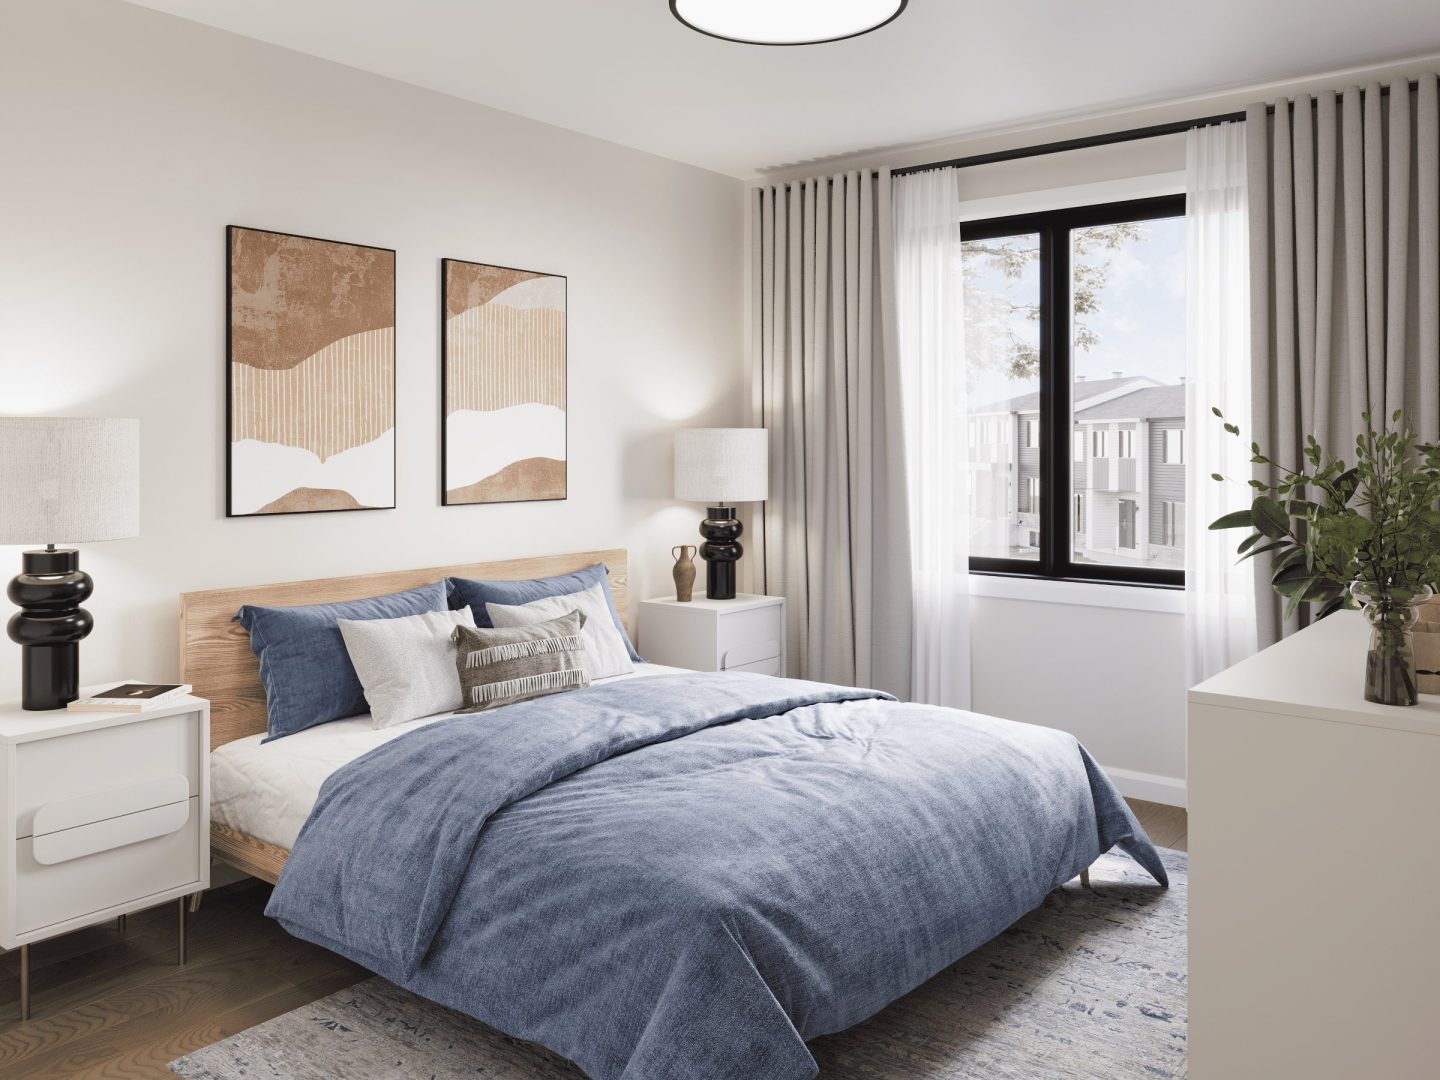 The Onesto model is a single-story townhouse in a contemporary style. View of the secondary bedroom.